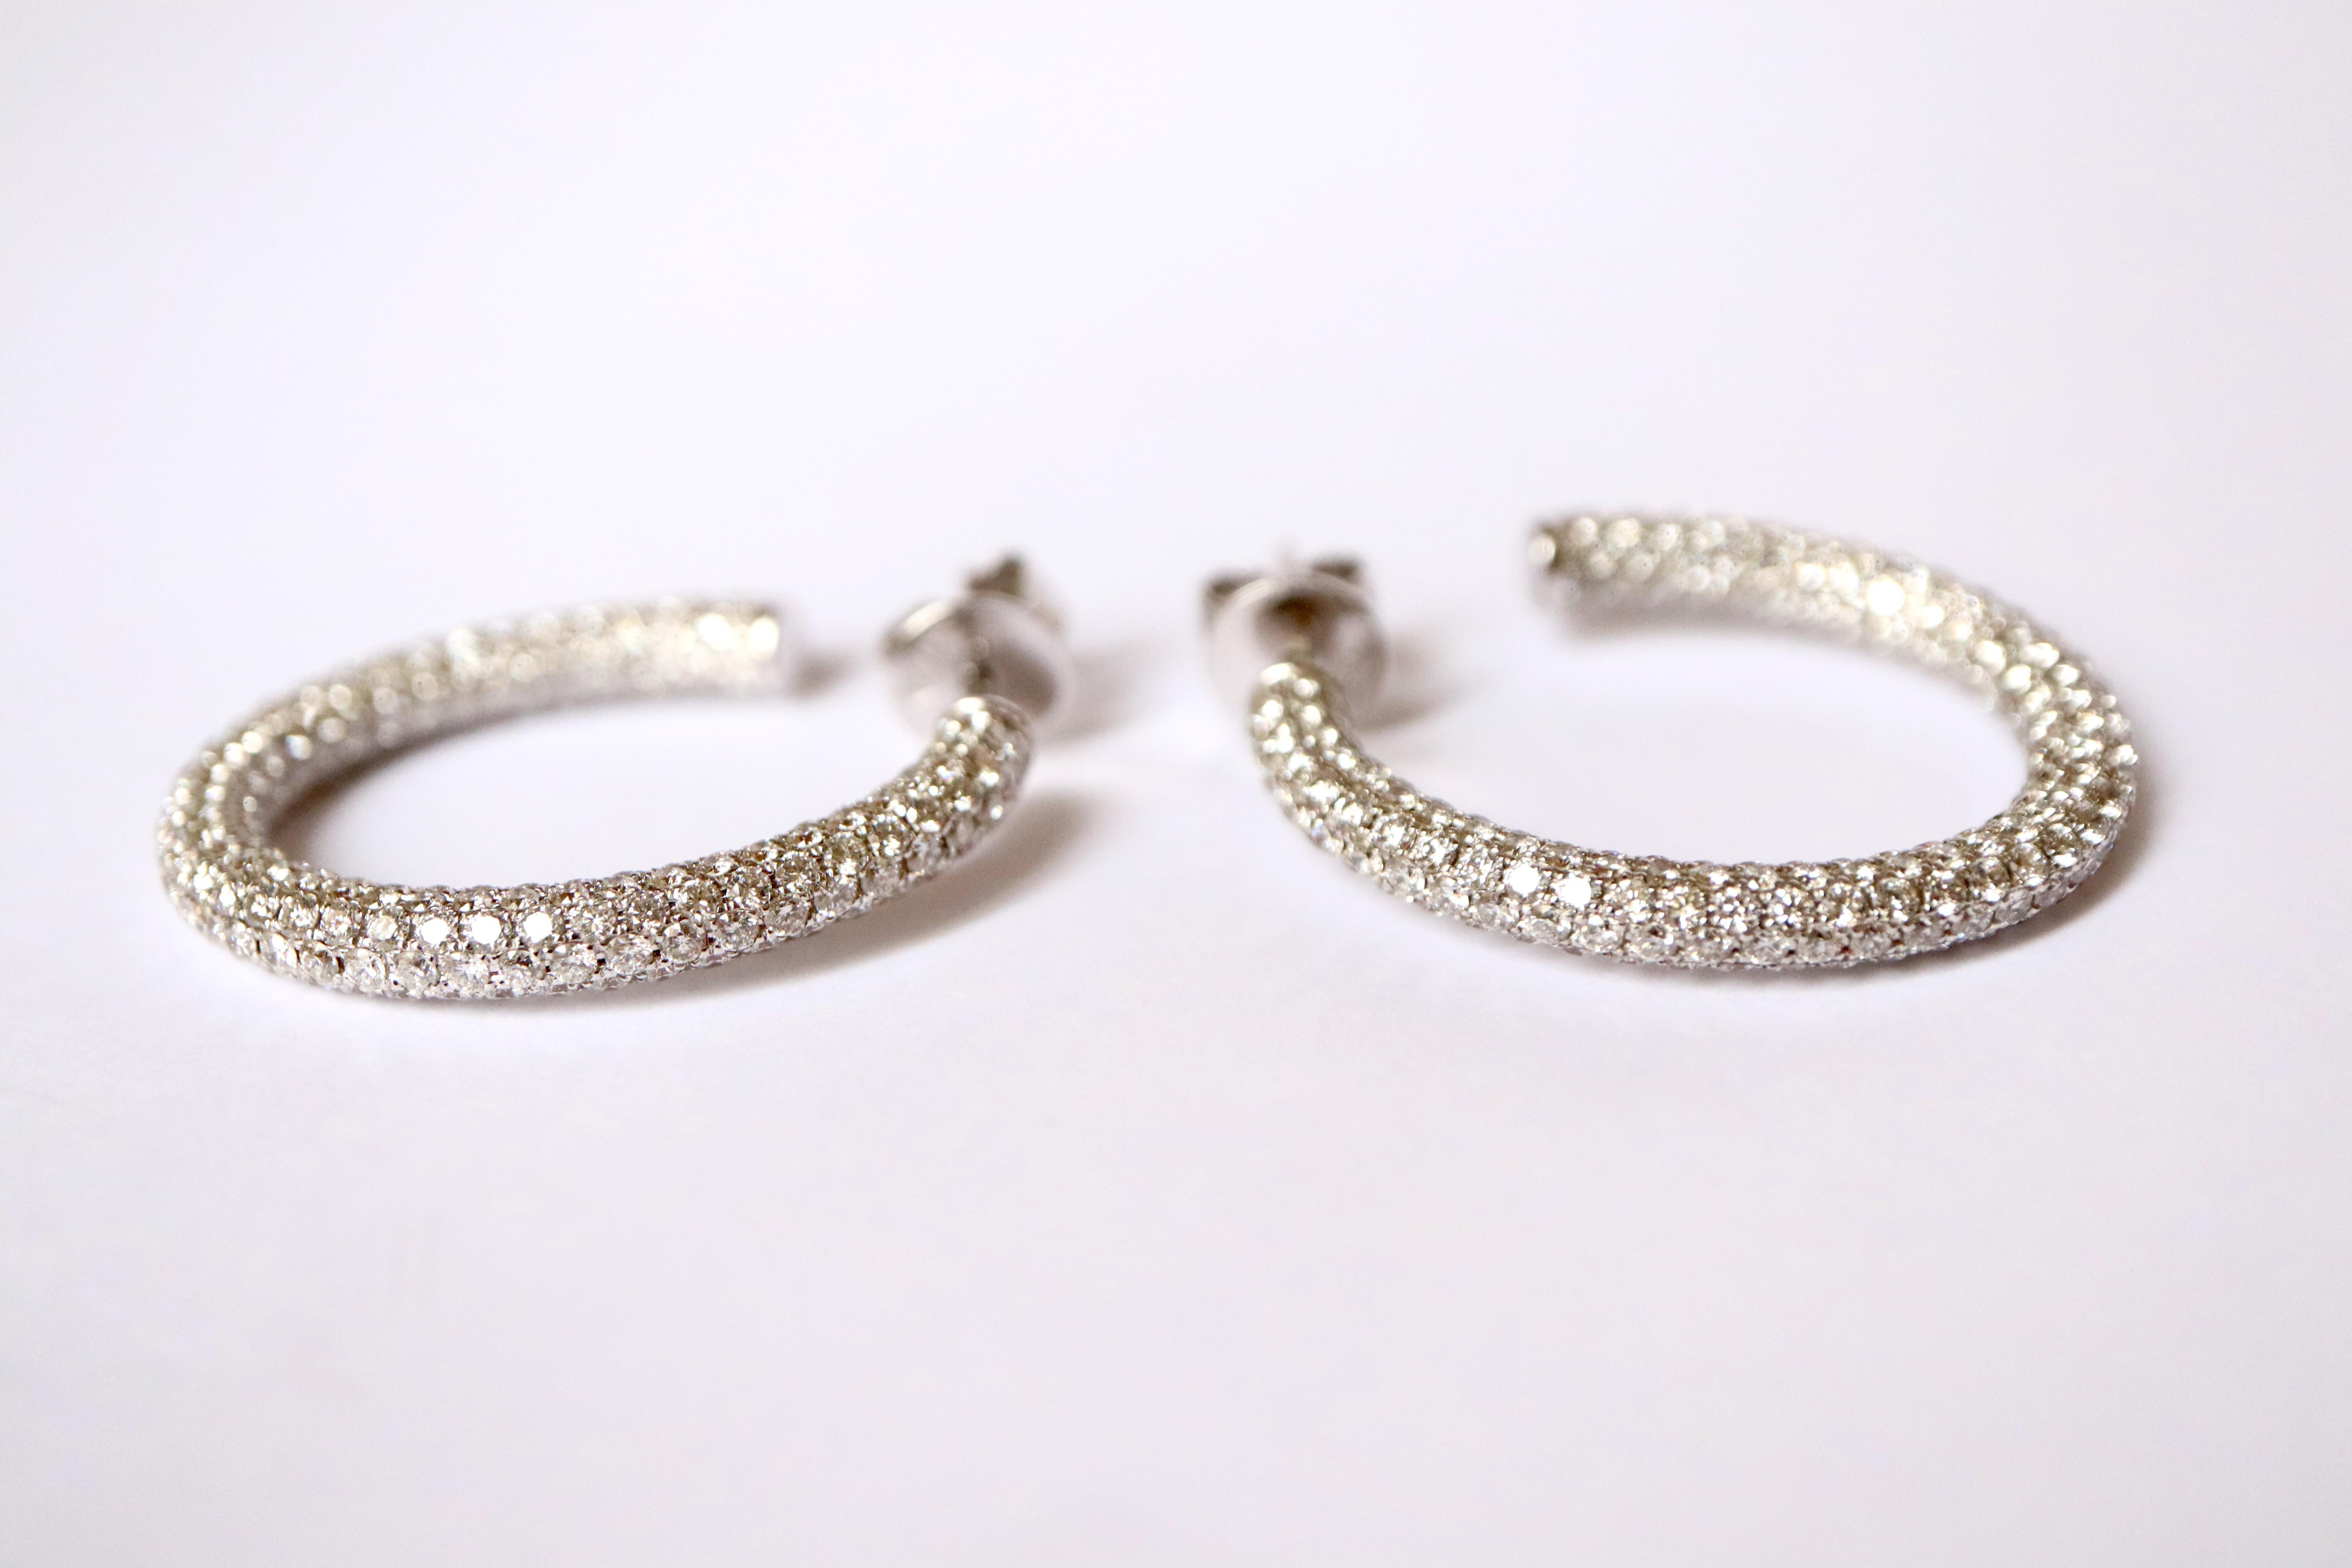 Brilliant Cut Hoop Earrings in 18 Carat White Gold Setting 5.32 Carats of Diamonds For Sale